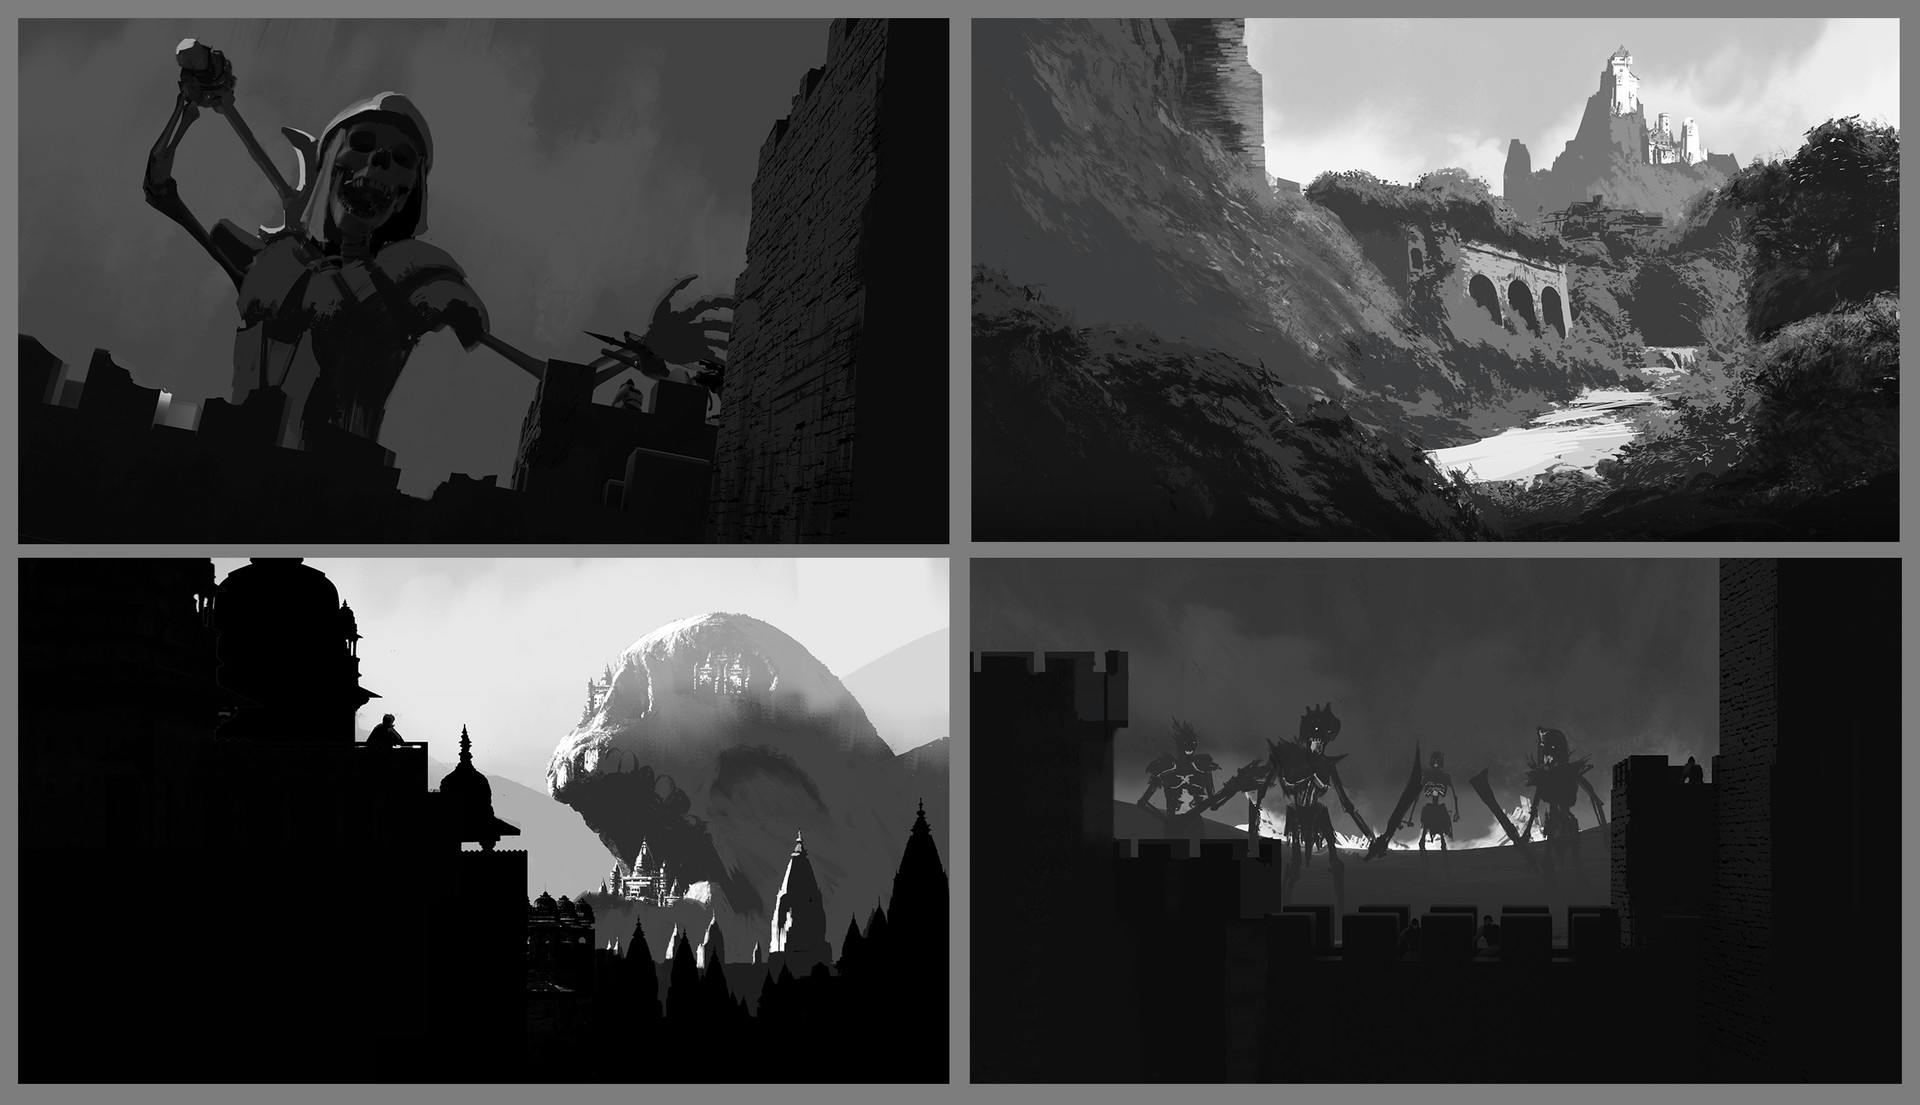 Concept art of a sequence of images depicting giant skeletons attacking an ancient city